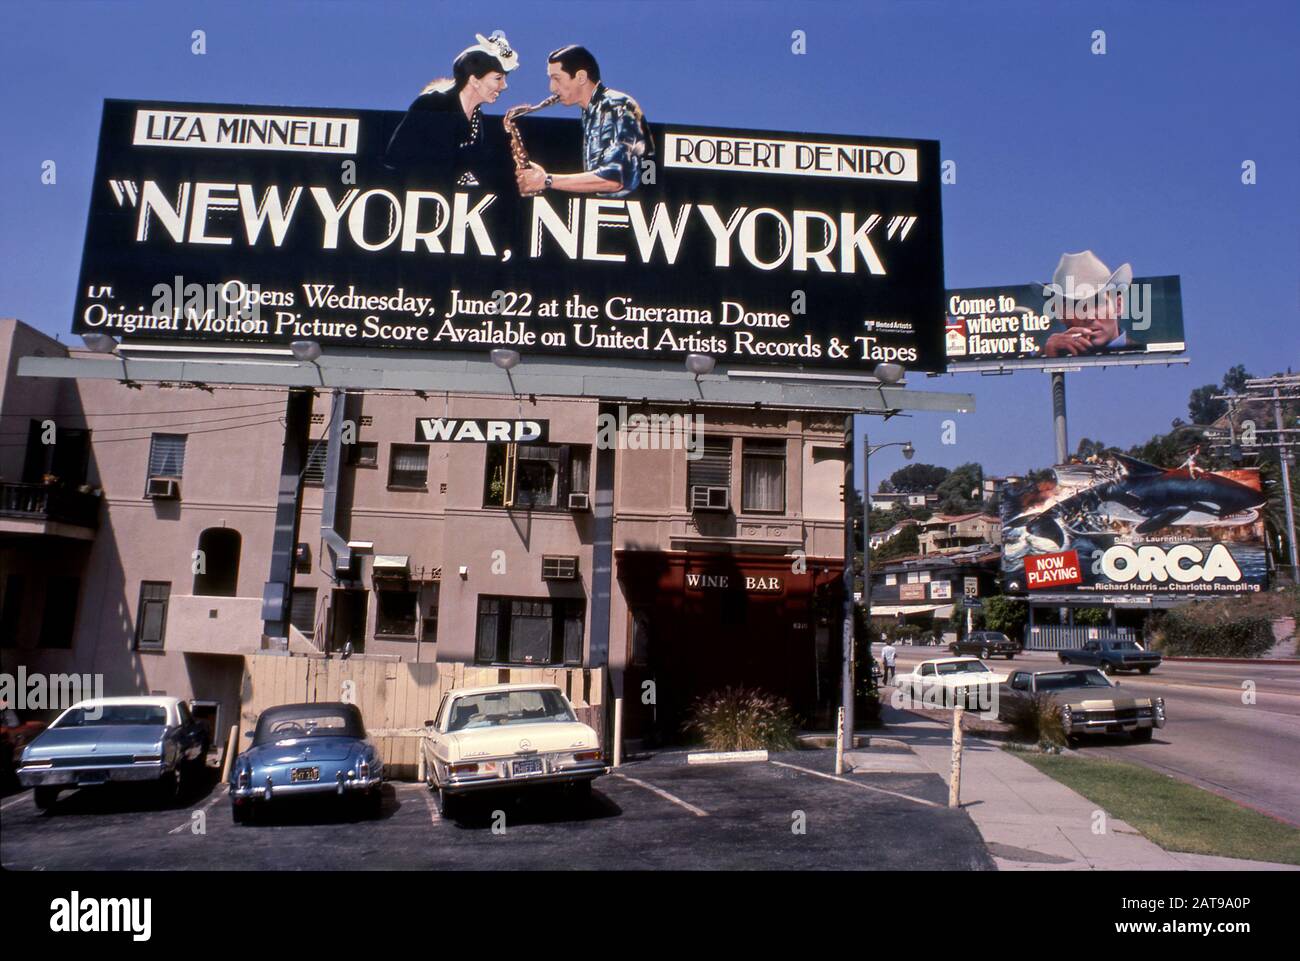 Billboards on the Sunset Strip including Liza Minelli, Robert DeNiro in New York, New York, the Marlboro Man and the movie Orca in July of 1977. Stock Photo